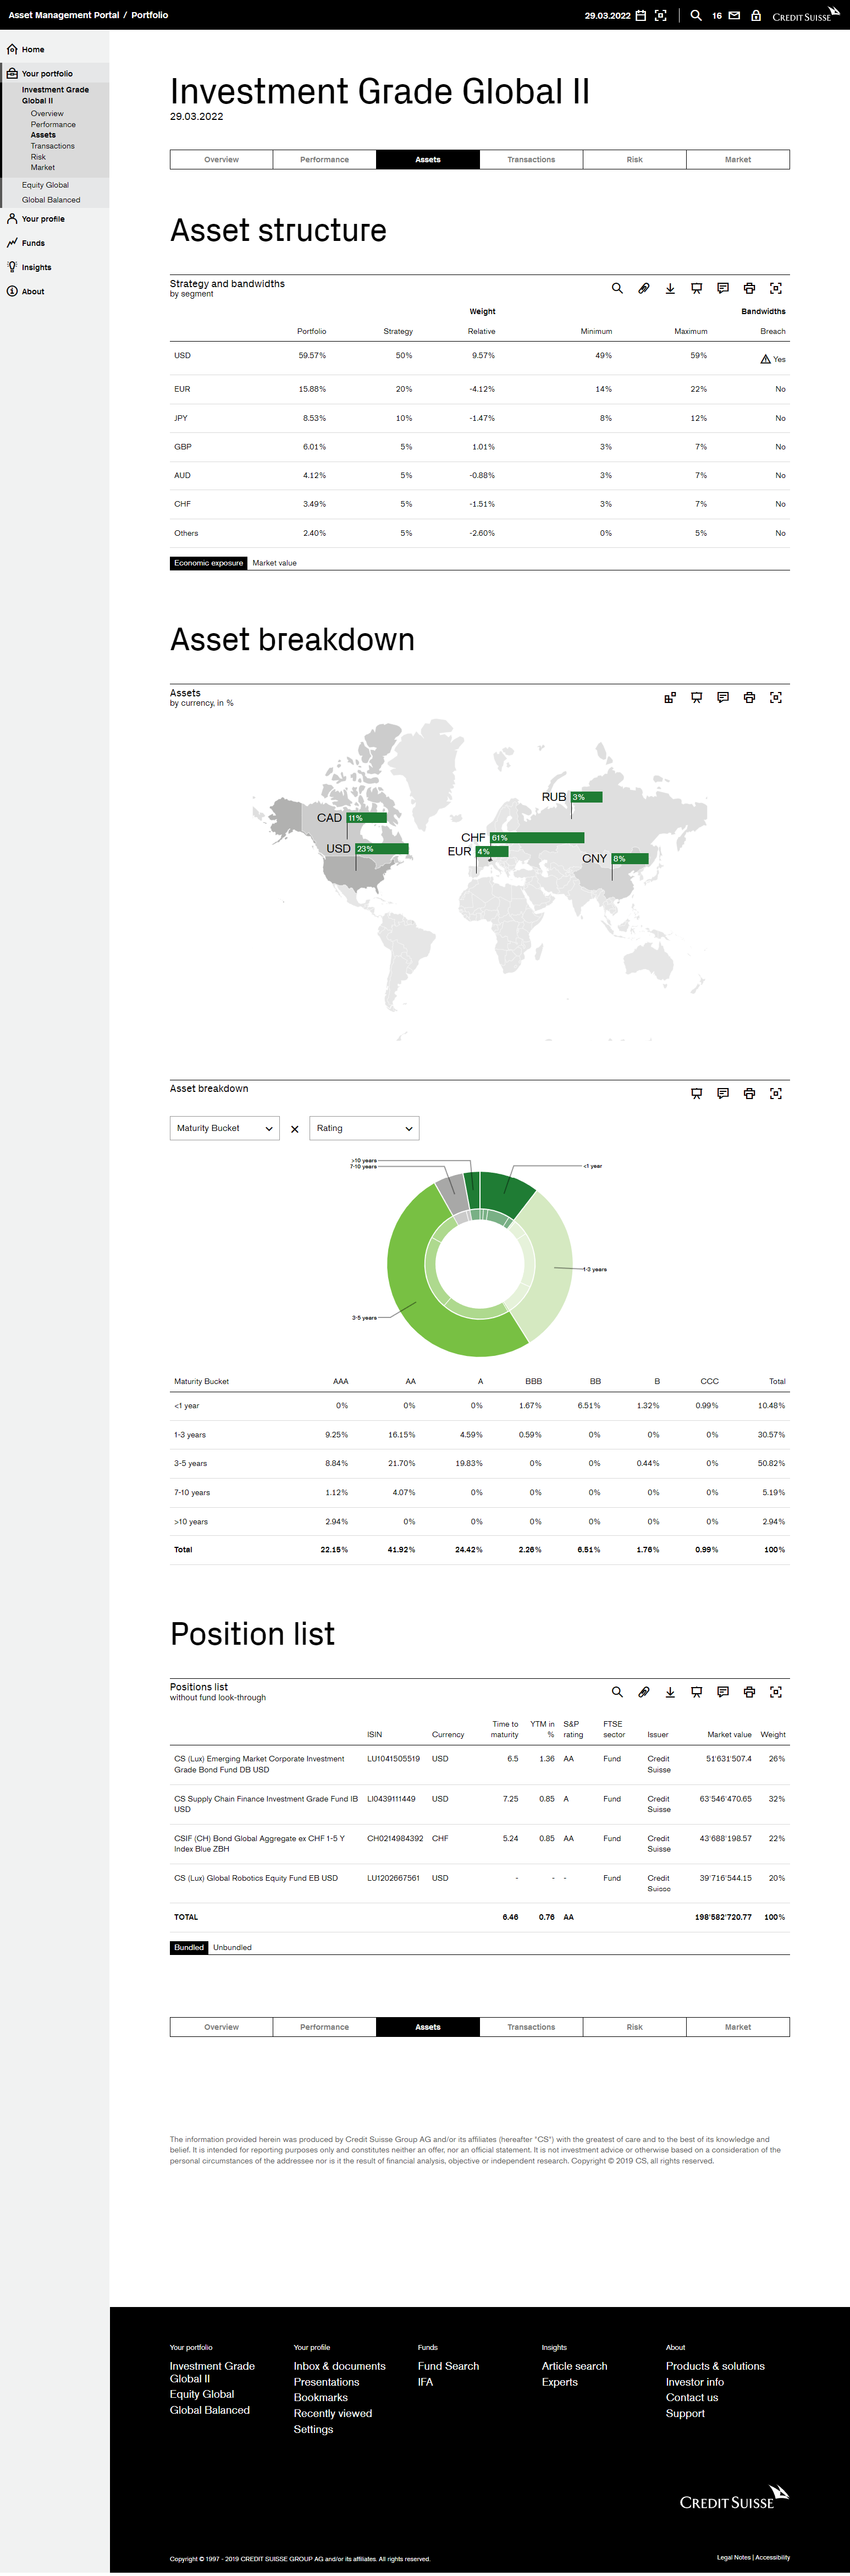 The core of the platform: the portfolio views. These rich report views were fully implemented with all the charts and features such as adding components to the dashboard or presentation, fullscreen, and printing. The data could be swapped out at anytime on the prototype backend by the client.